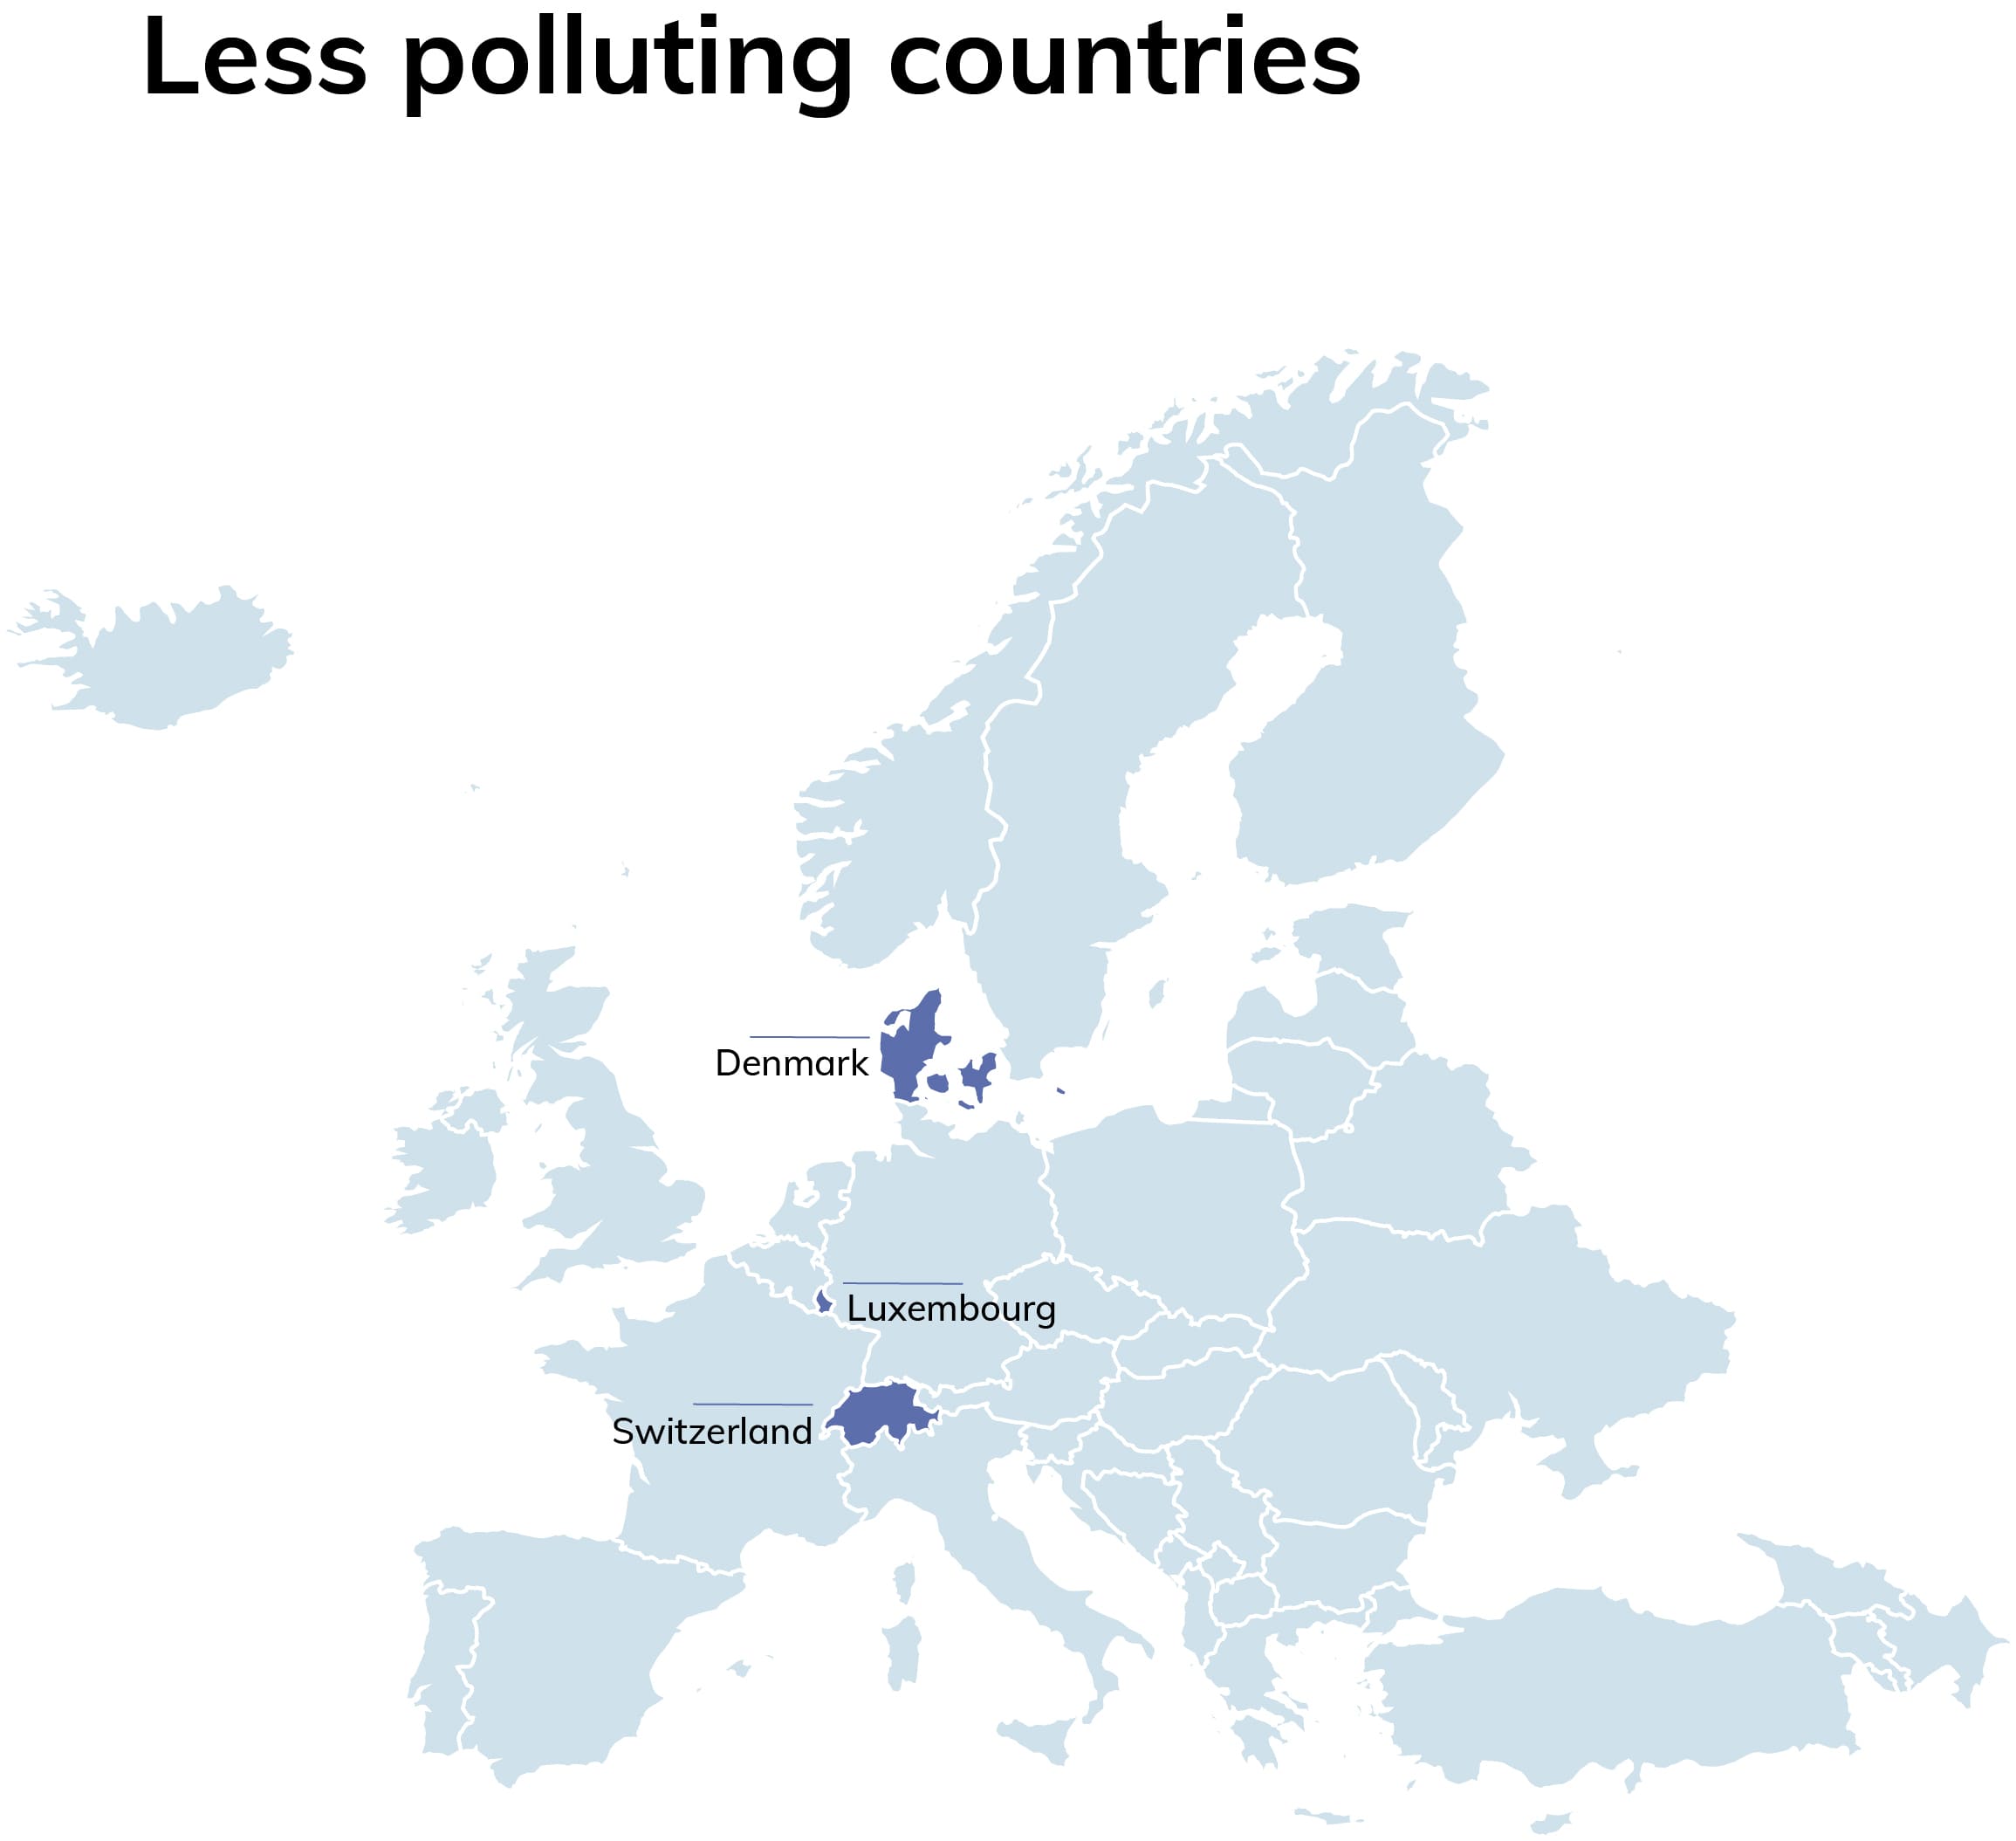 Less polluting countries